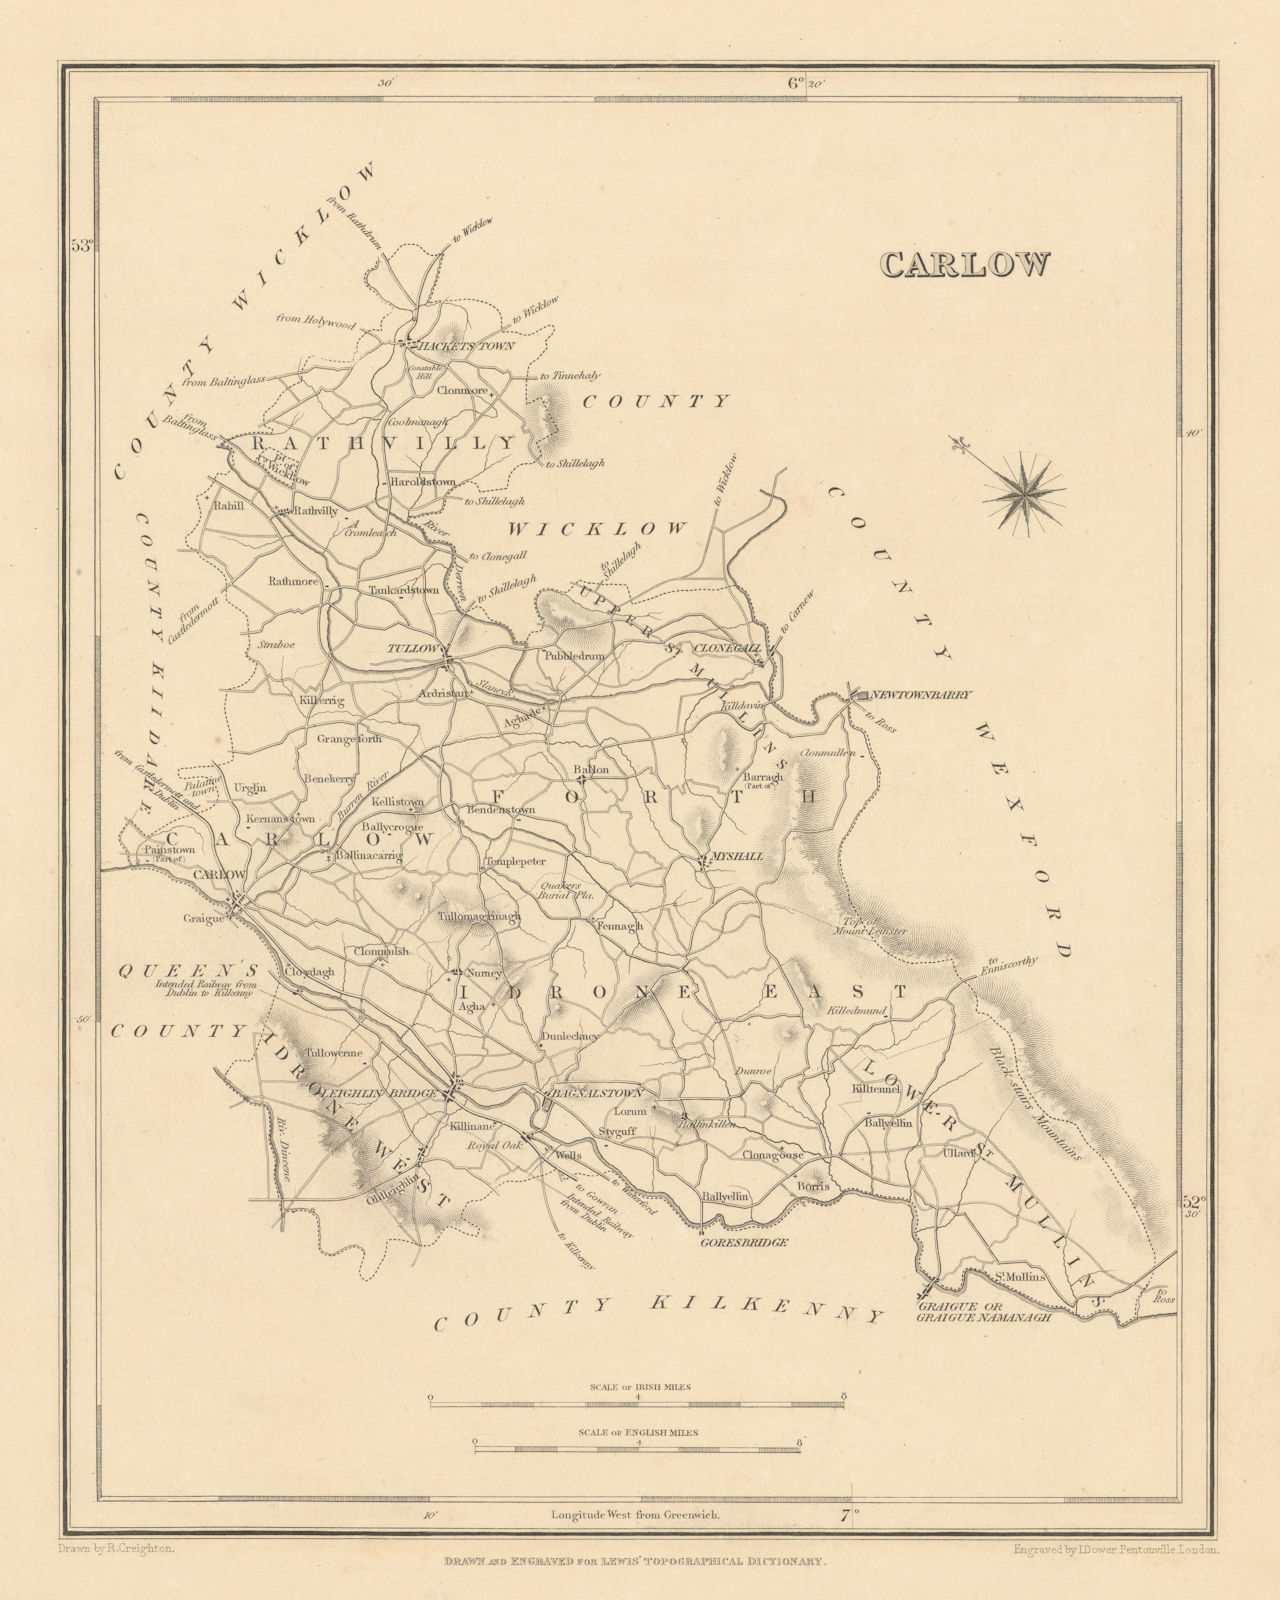 COUNTY CARLOW antique map for LEWIS by CREIGHTON & DOWER - Ireland 1837